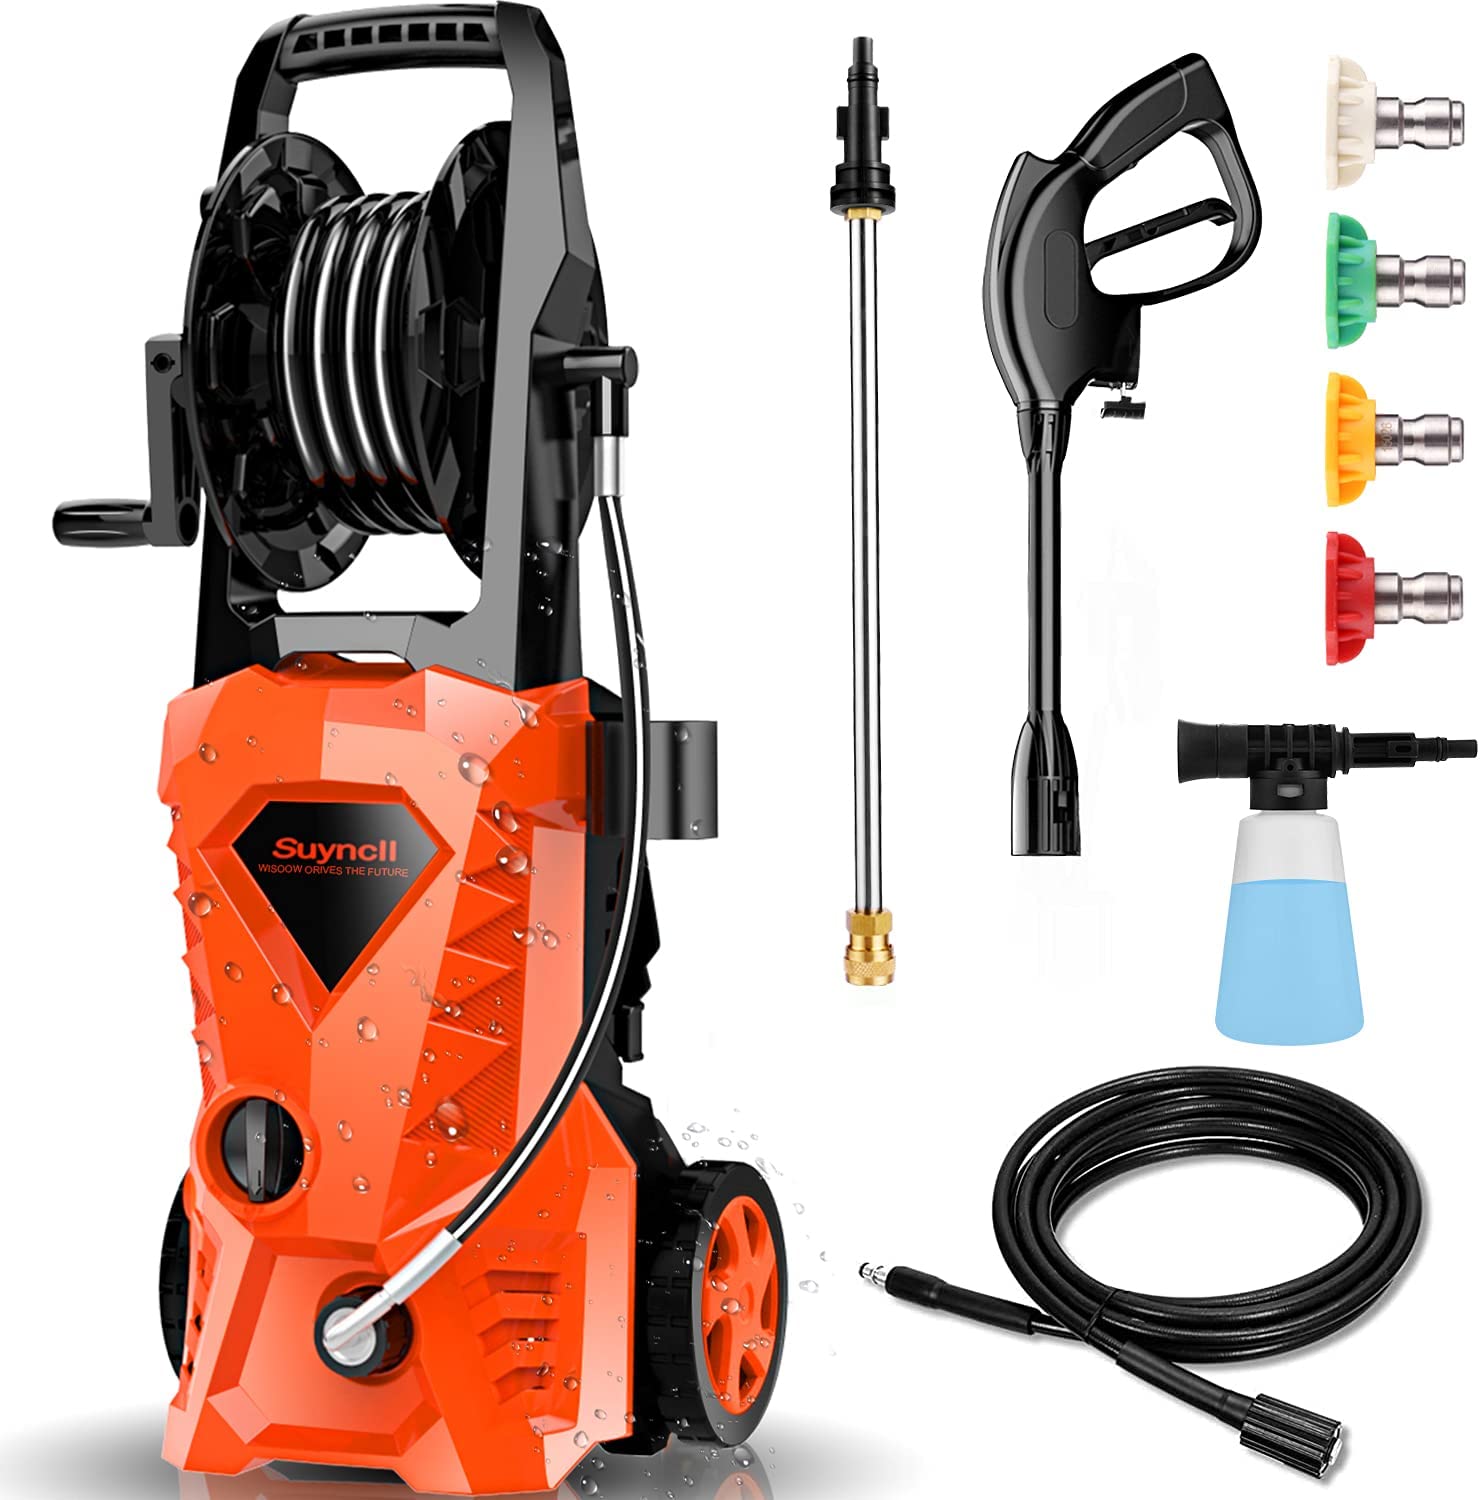 Suyncll Pressure Washer 3800 PSI 2.8GPM Electric Pressure Washer High Power Washer Machine with Hose Reel Blue 